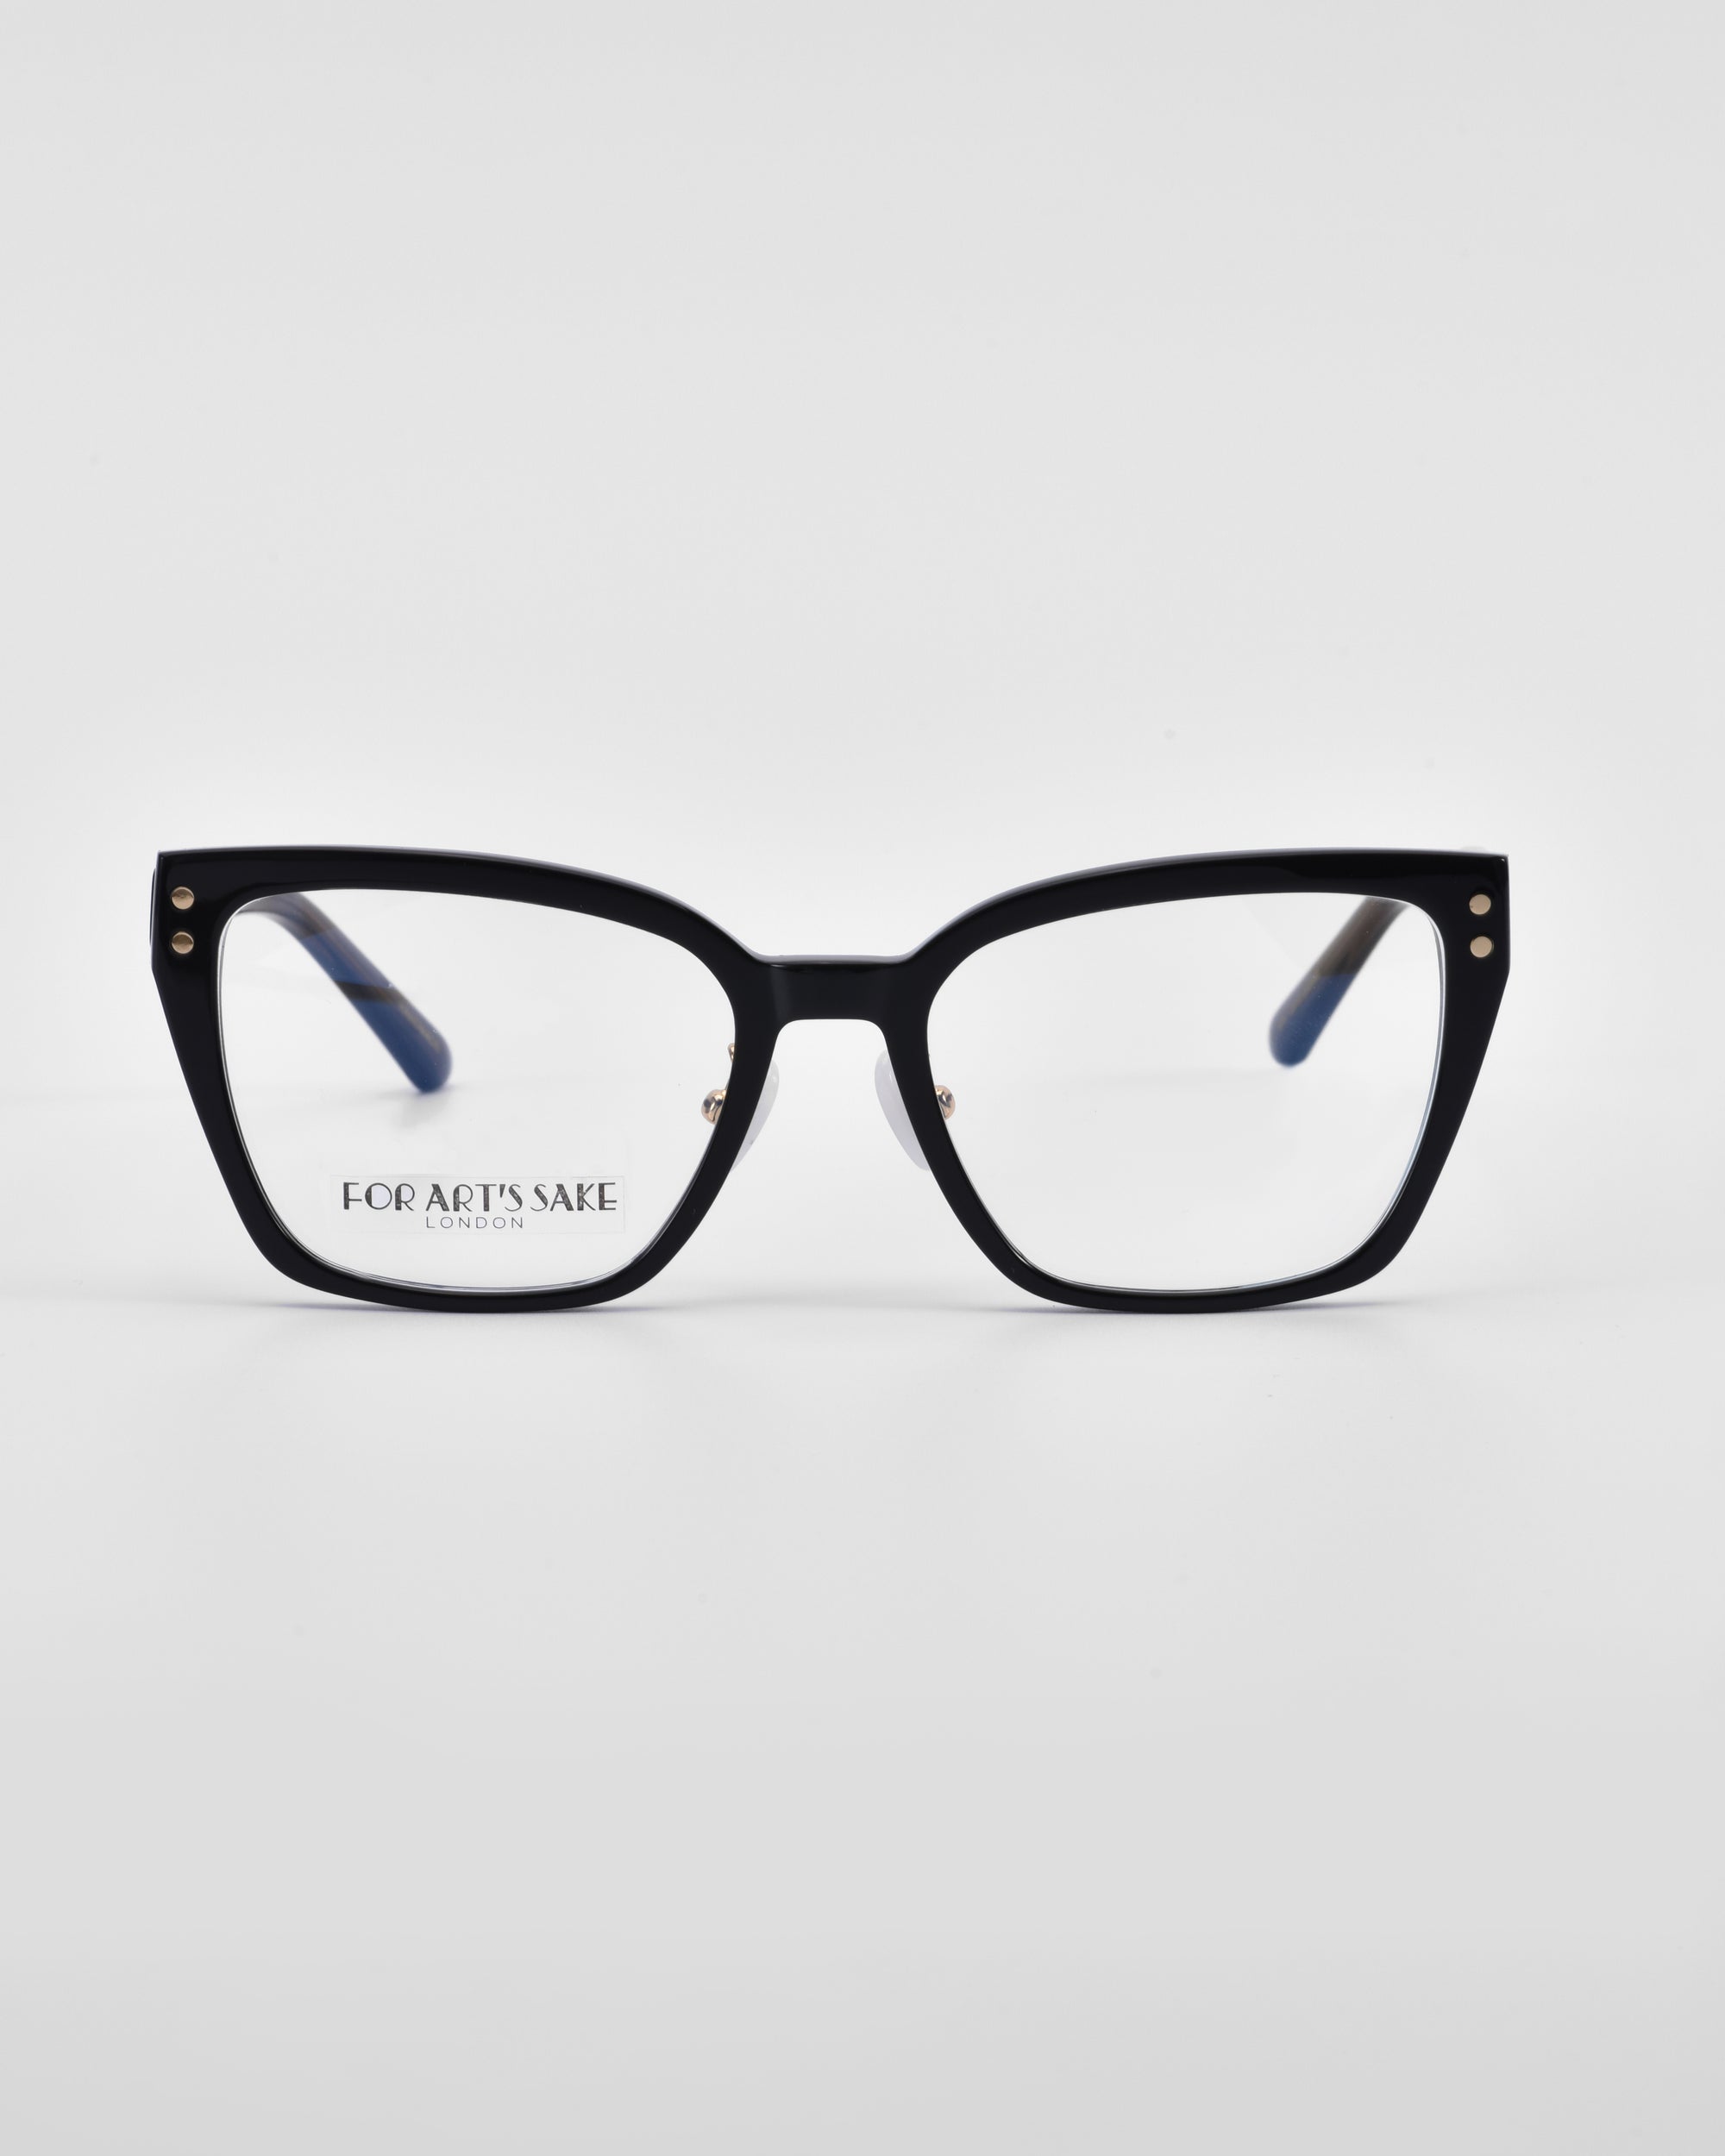 A pair of black-framed eyeglasses with a geometric shape, slightly angled at the corners, resembling cat-eye opticals. The lenses are clear, and the words "For Art's Sake®" are visible on the inside of the left lens. The background is a plain white.